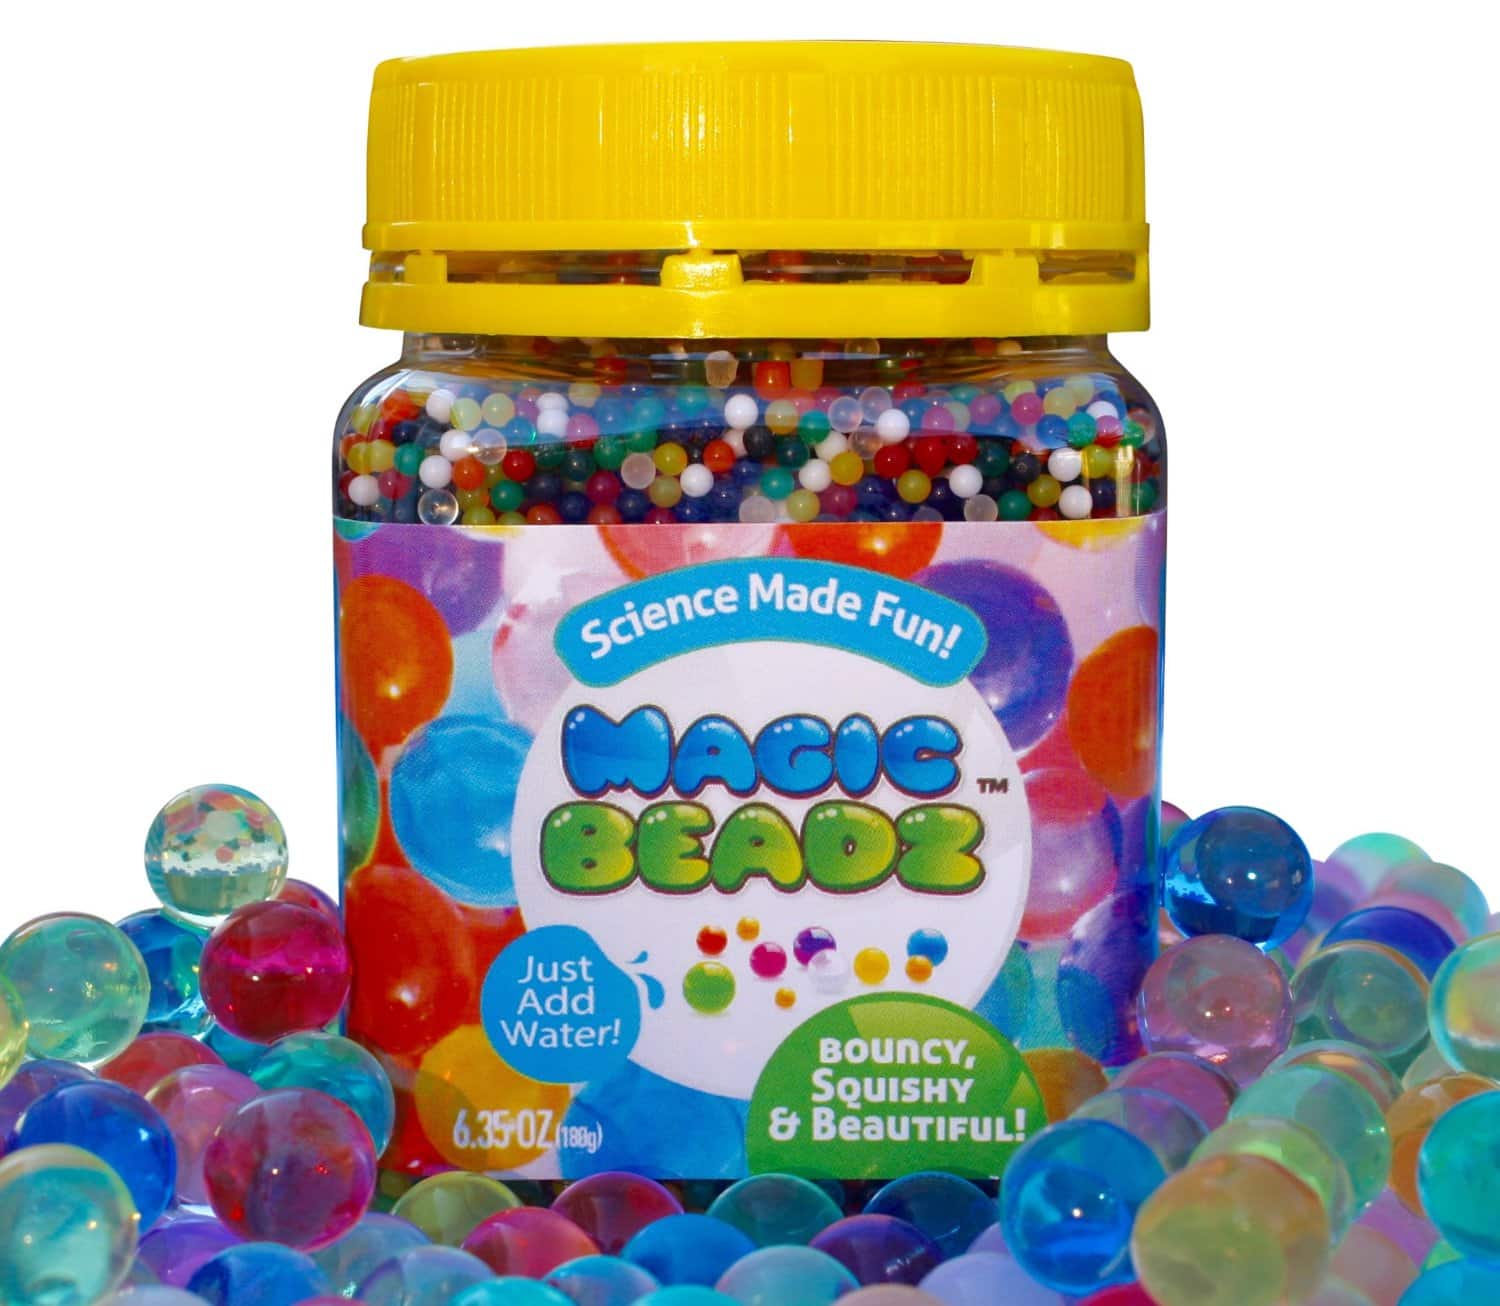 LIGHTNING DEAL ALERT! Jelly Water Beads are 44% off